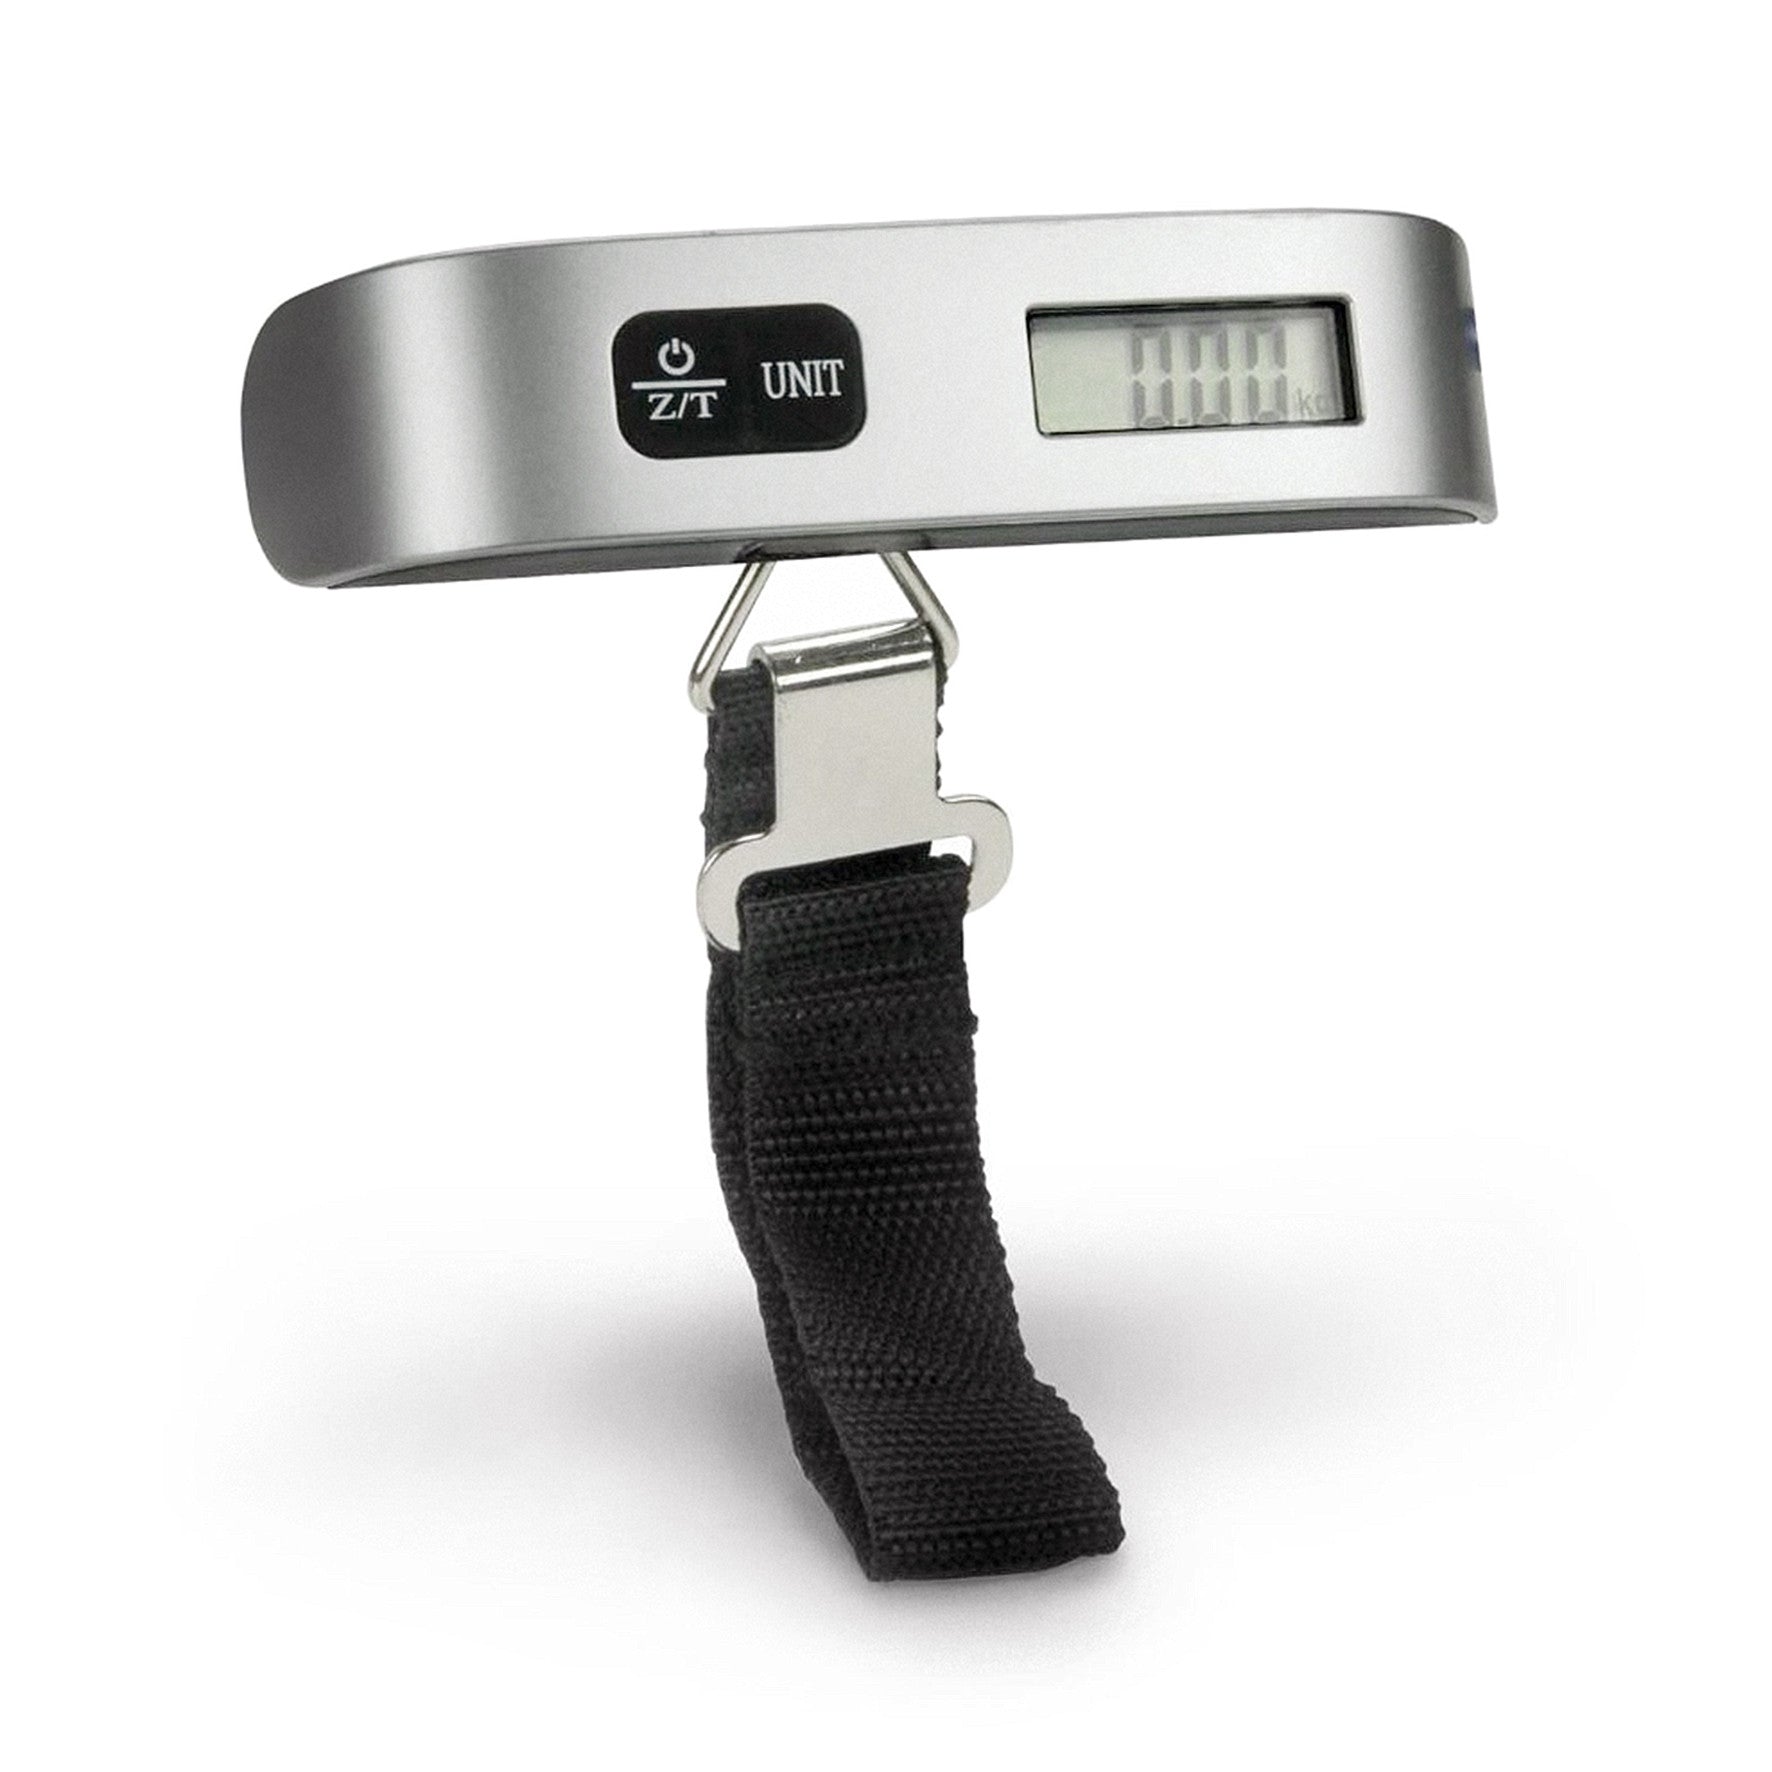 PORTABLE DIGITAL LUGGAGE SCALE 50 KG (110 LB) CAPACITY FOR WINE LOVERS WHO CHECK WINE